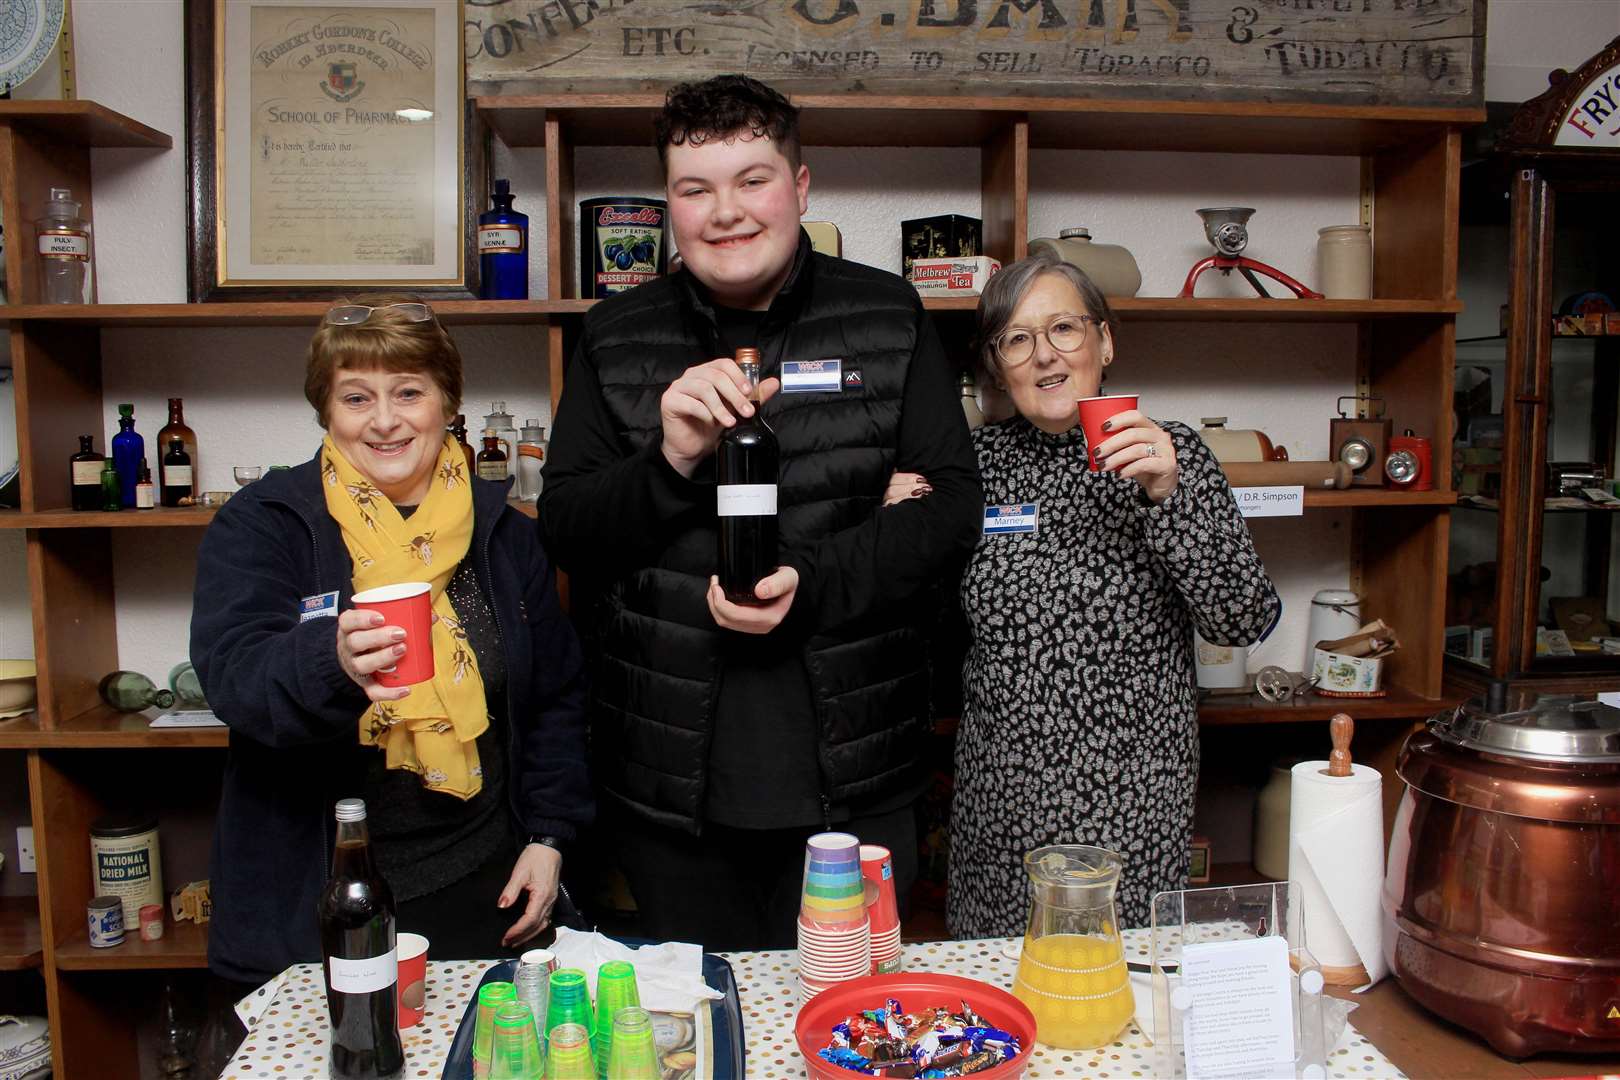 Wick Society volunteers Jeanette Coghill, Scott Mackenzie and Marney Bruce were offering non-alcoholic mulled wine, ginger wine, orange juice and sweets. Picture: Alan Hendry